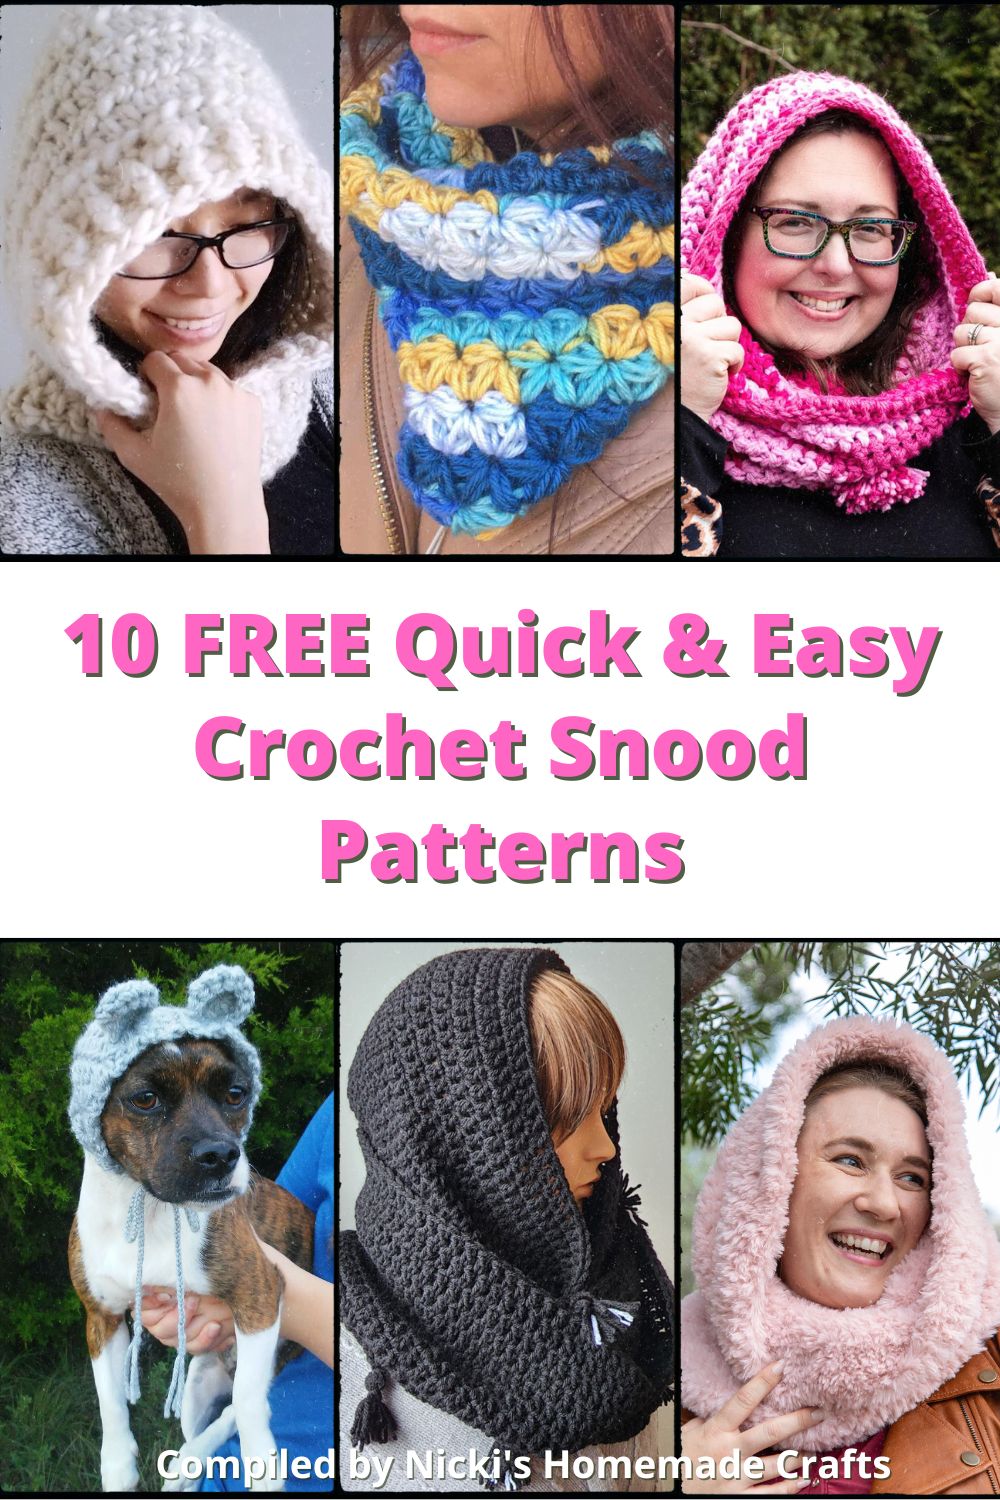 10 Free Quick and Easy Snood Crochet Patterns - Nicki's Homemade Crafts